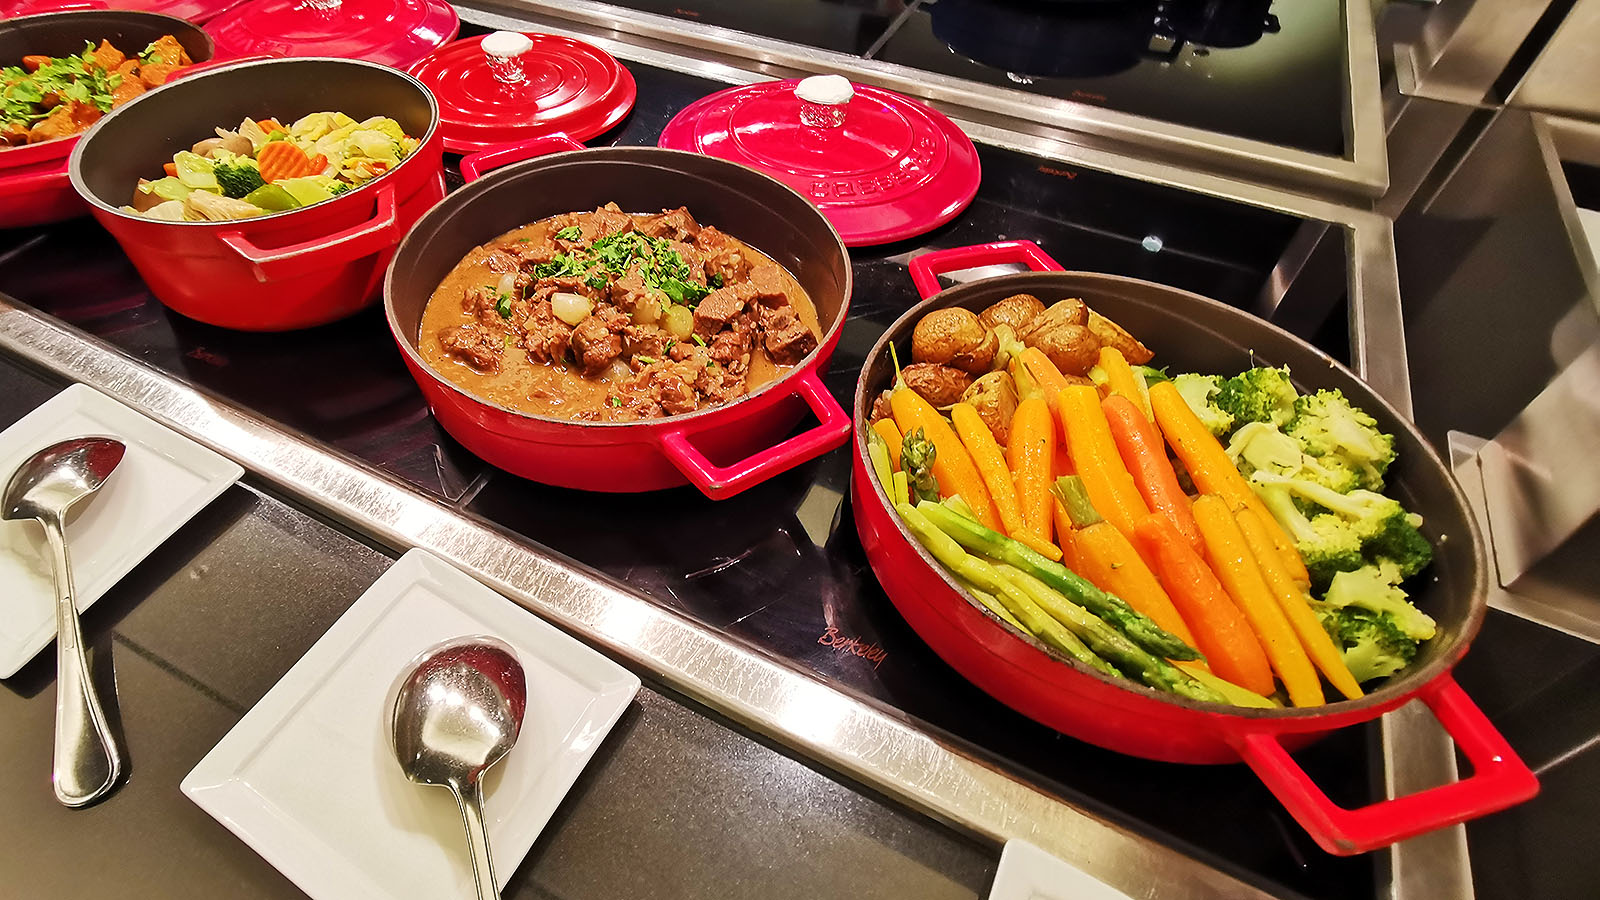 Hot buffet dishes at the British Airways Lounge, Singapore